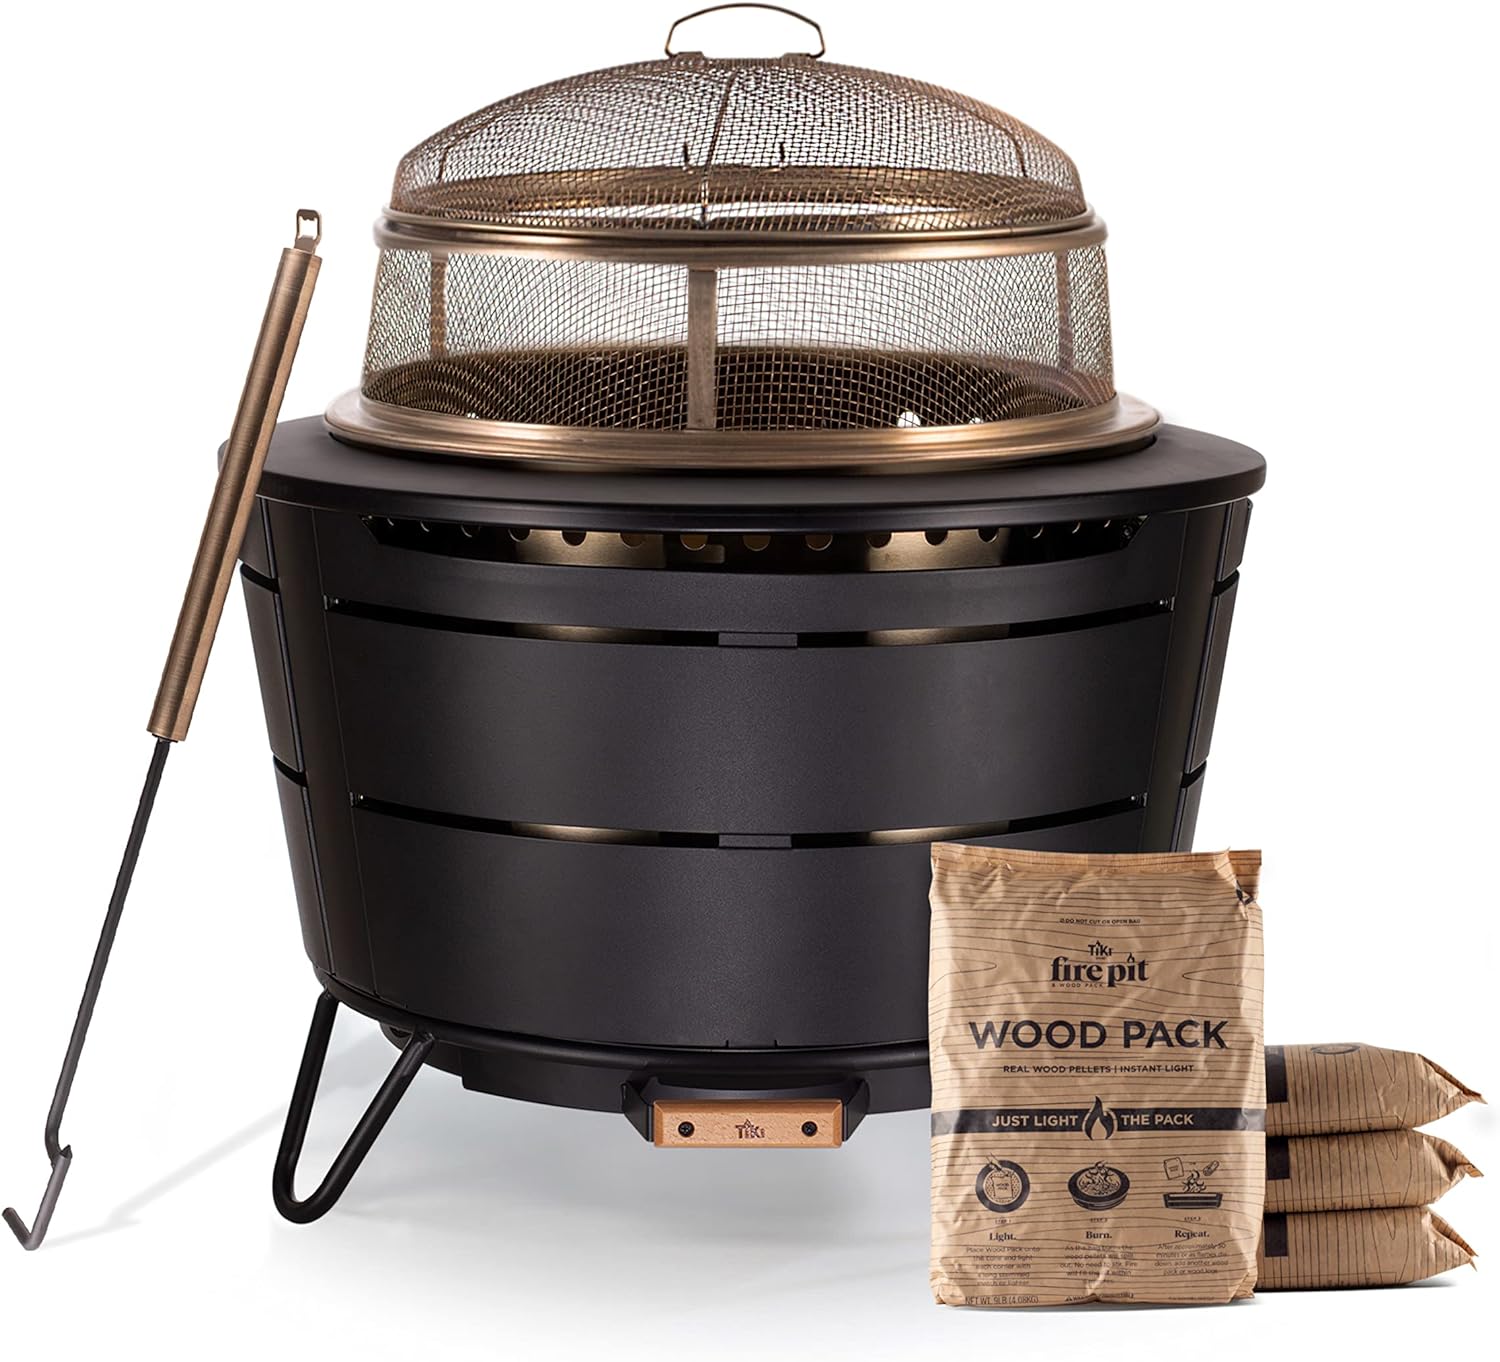 TIKI Brand Reunion Smokeless Fire Pit with Screen and Poker and Wood Pack Bundle